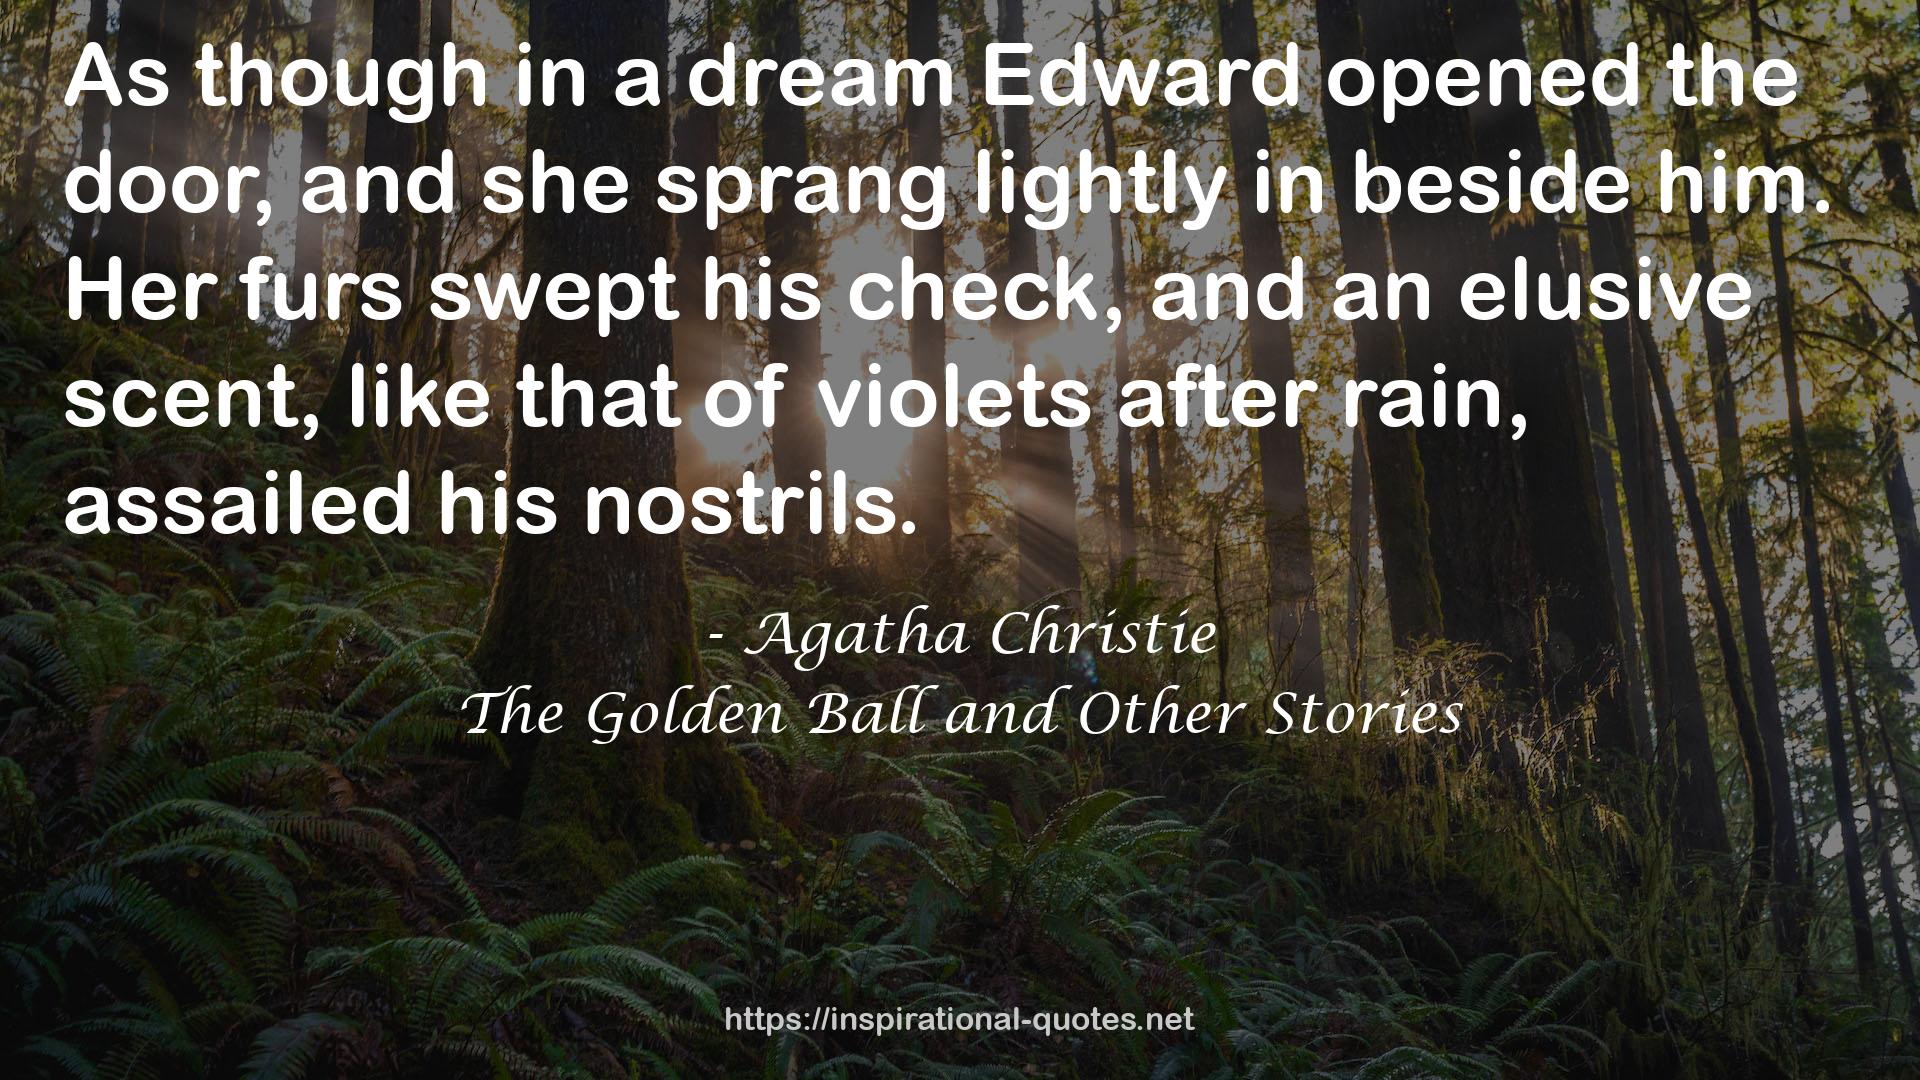 The Golden Ball and Other Stories QUOTES